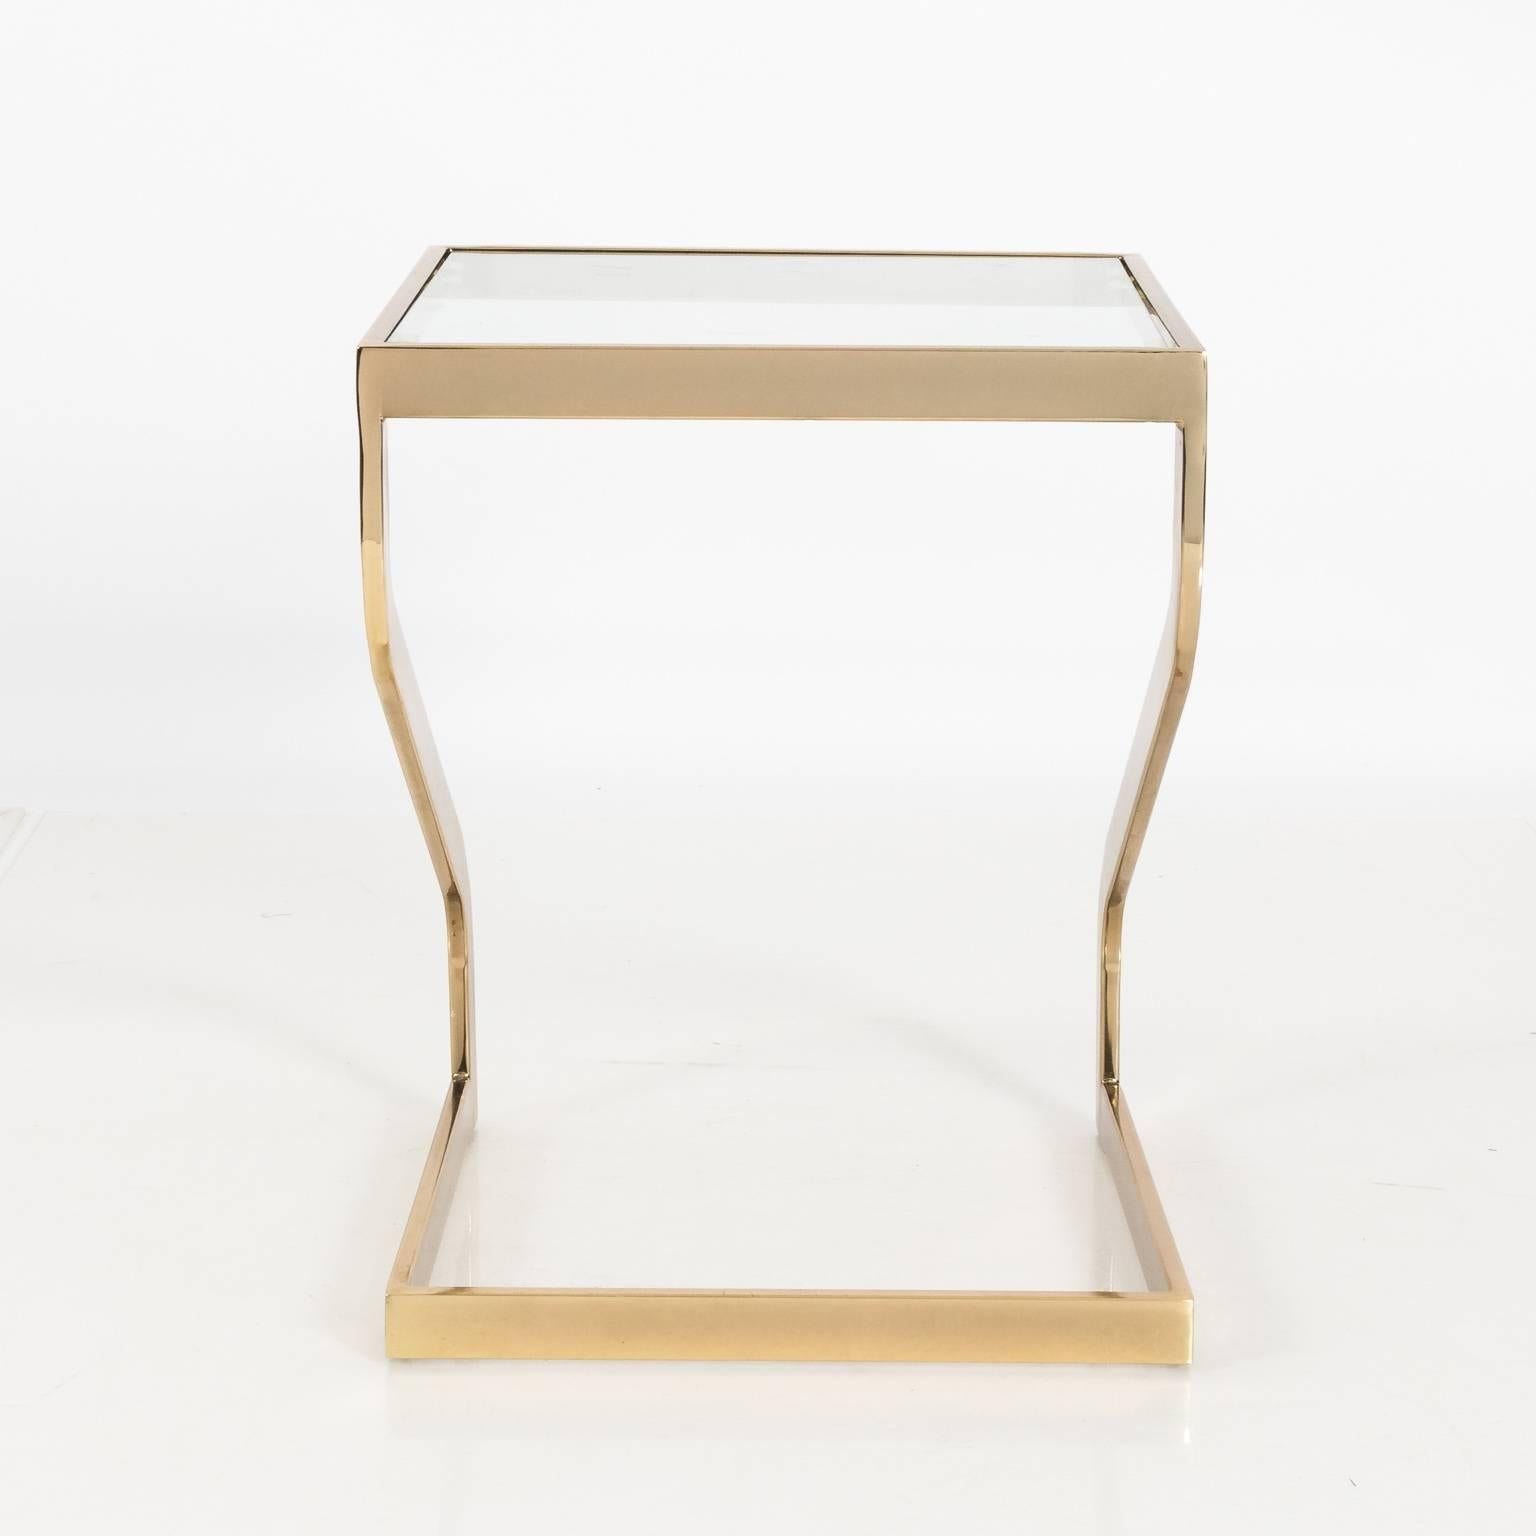 Pair of brass cantilever base side tables with glass tops by the Design Institute of America in the manner of Milo Baughman, circa 1970. Note that the glass tops have minor chips.